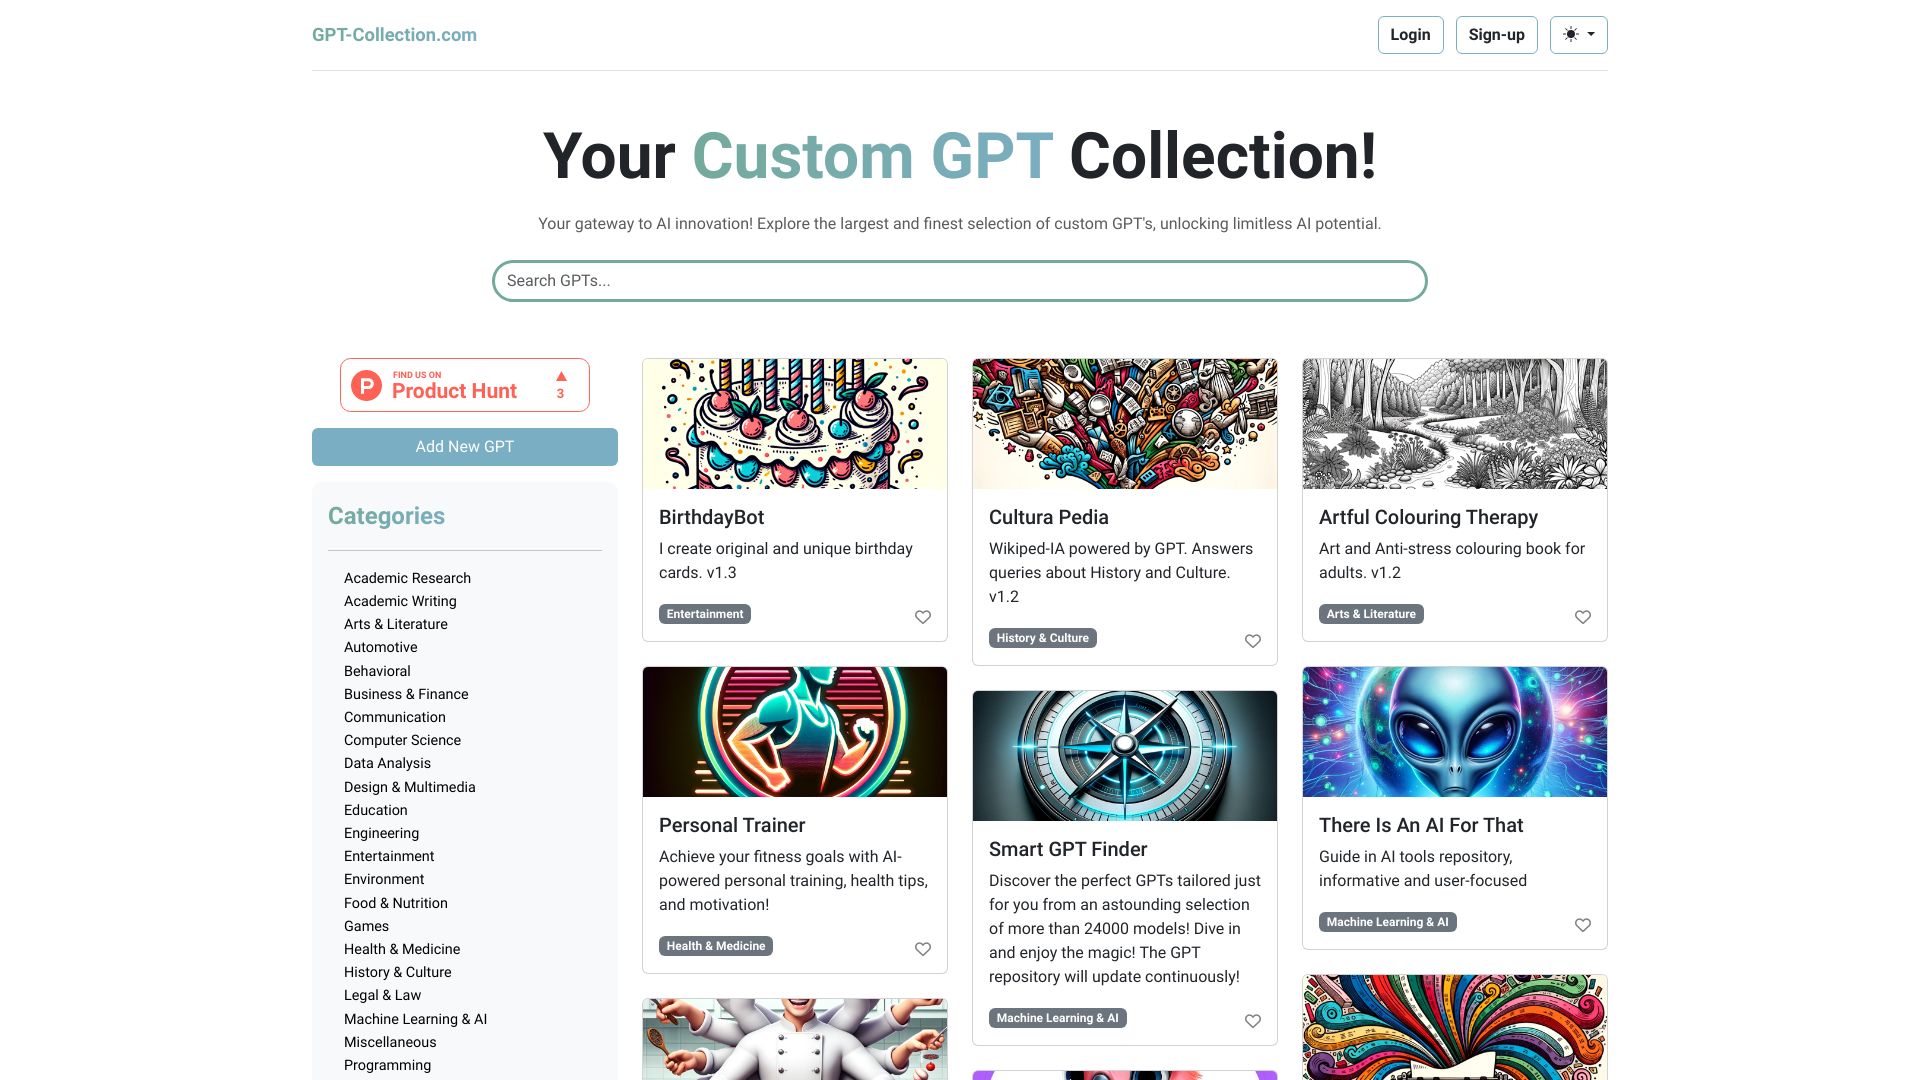 GPT-Collection